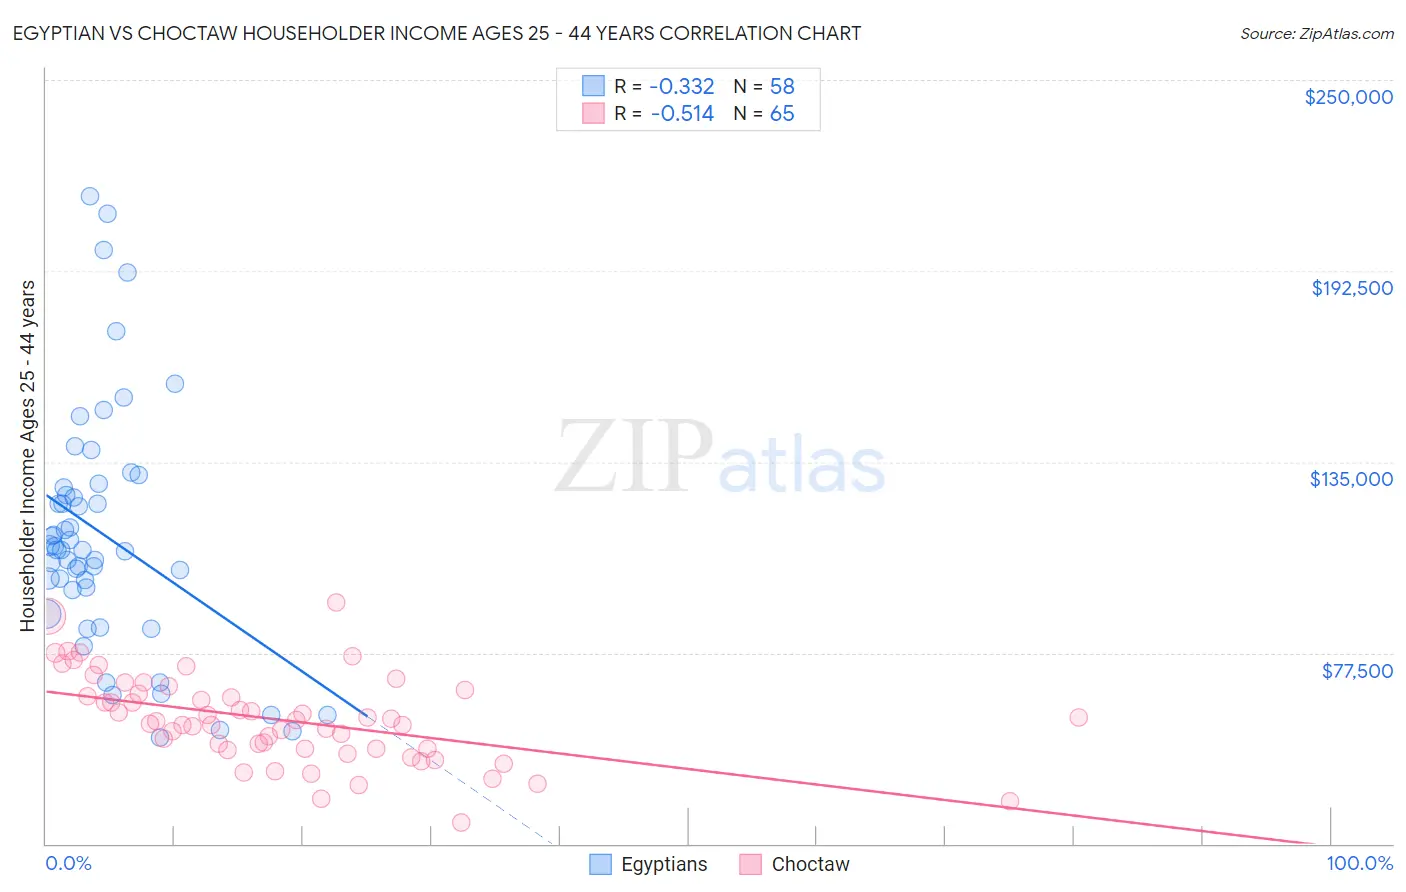 Egyptian vs Choctaw Householder Income Ages 25 - 44 years